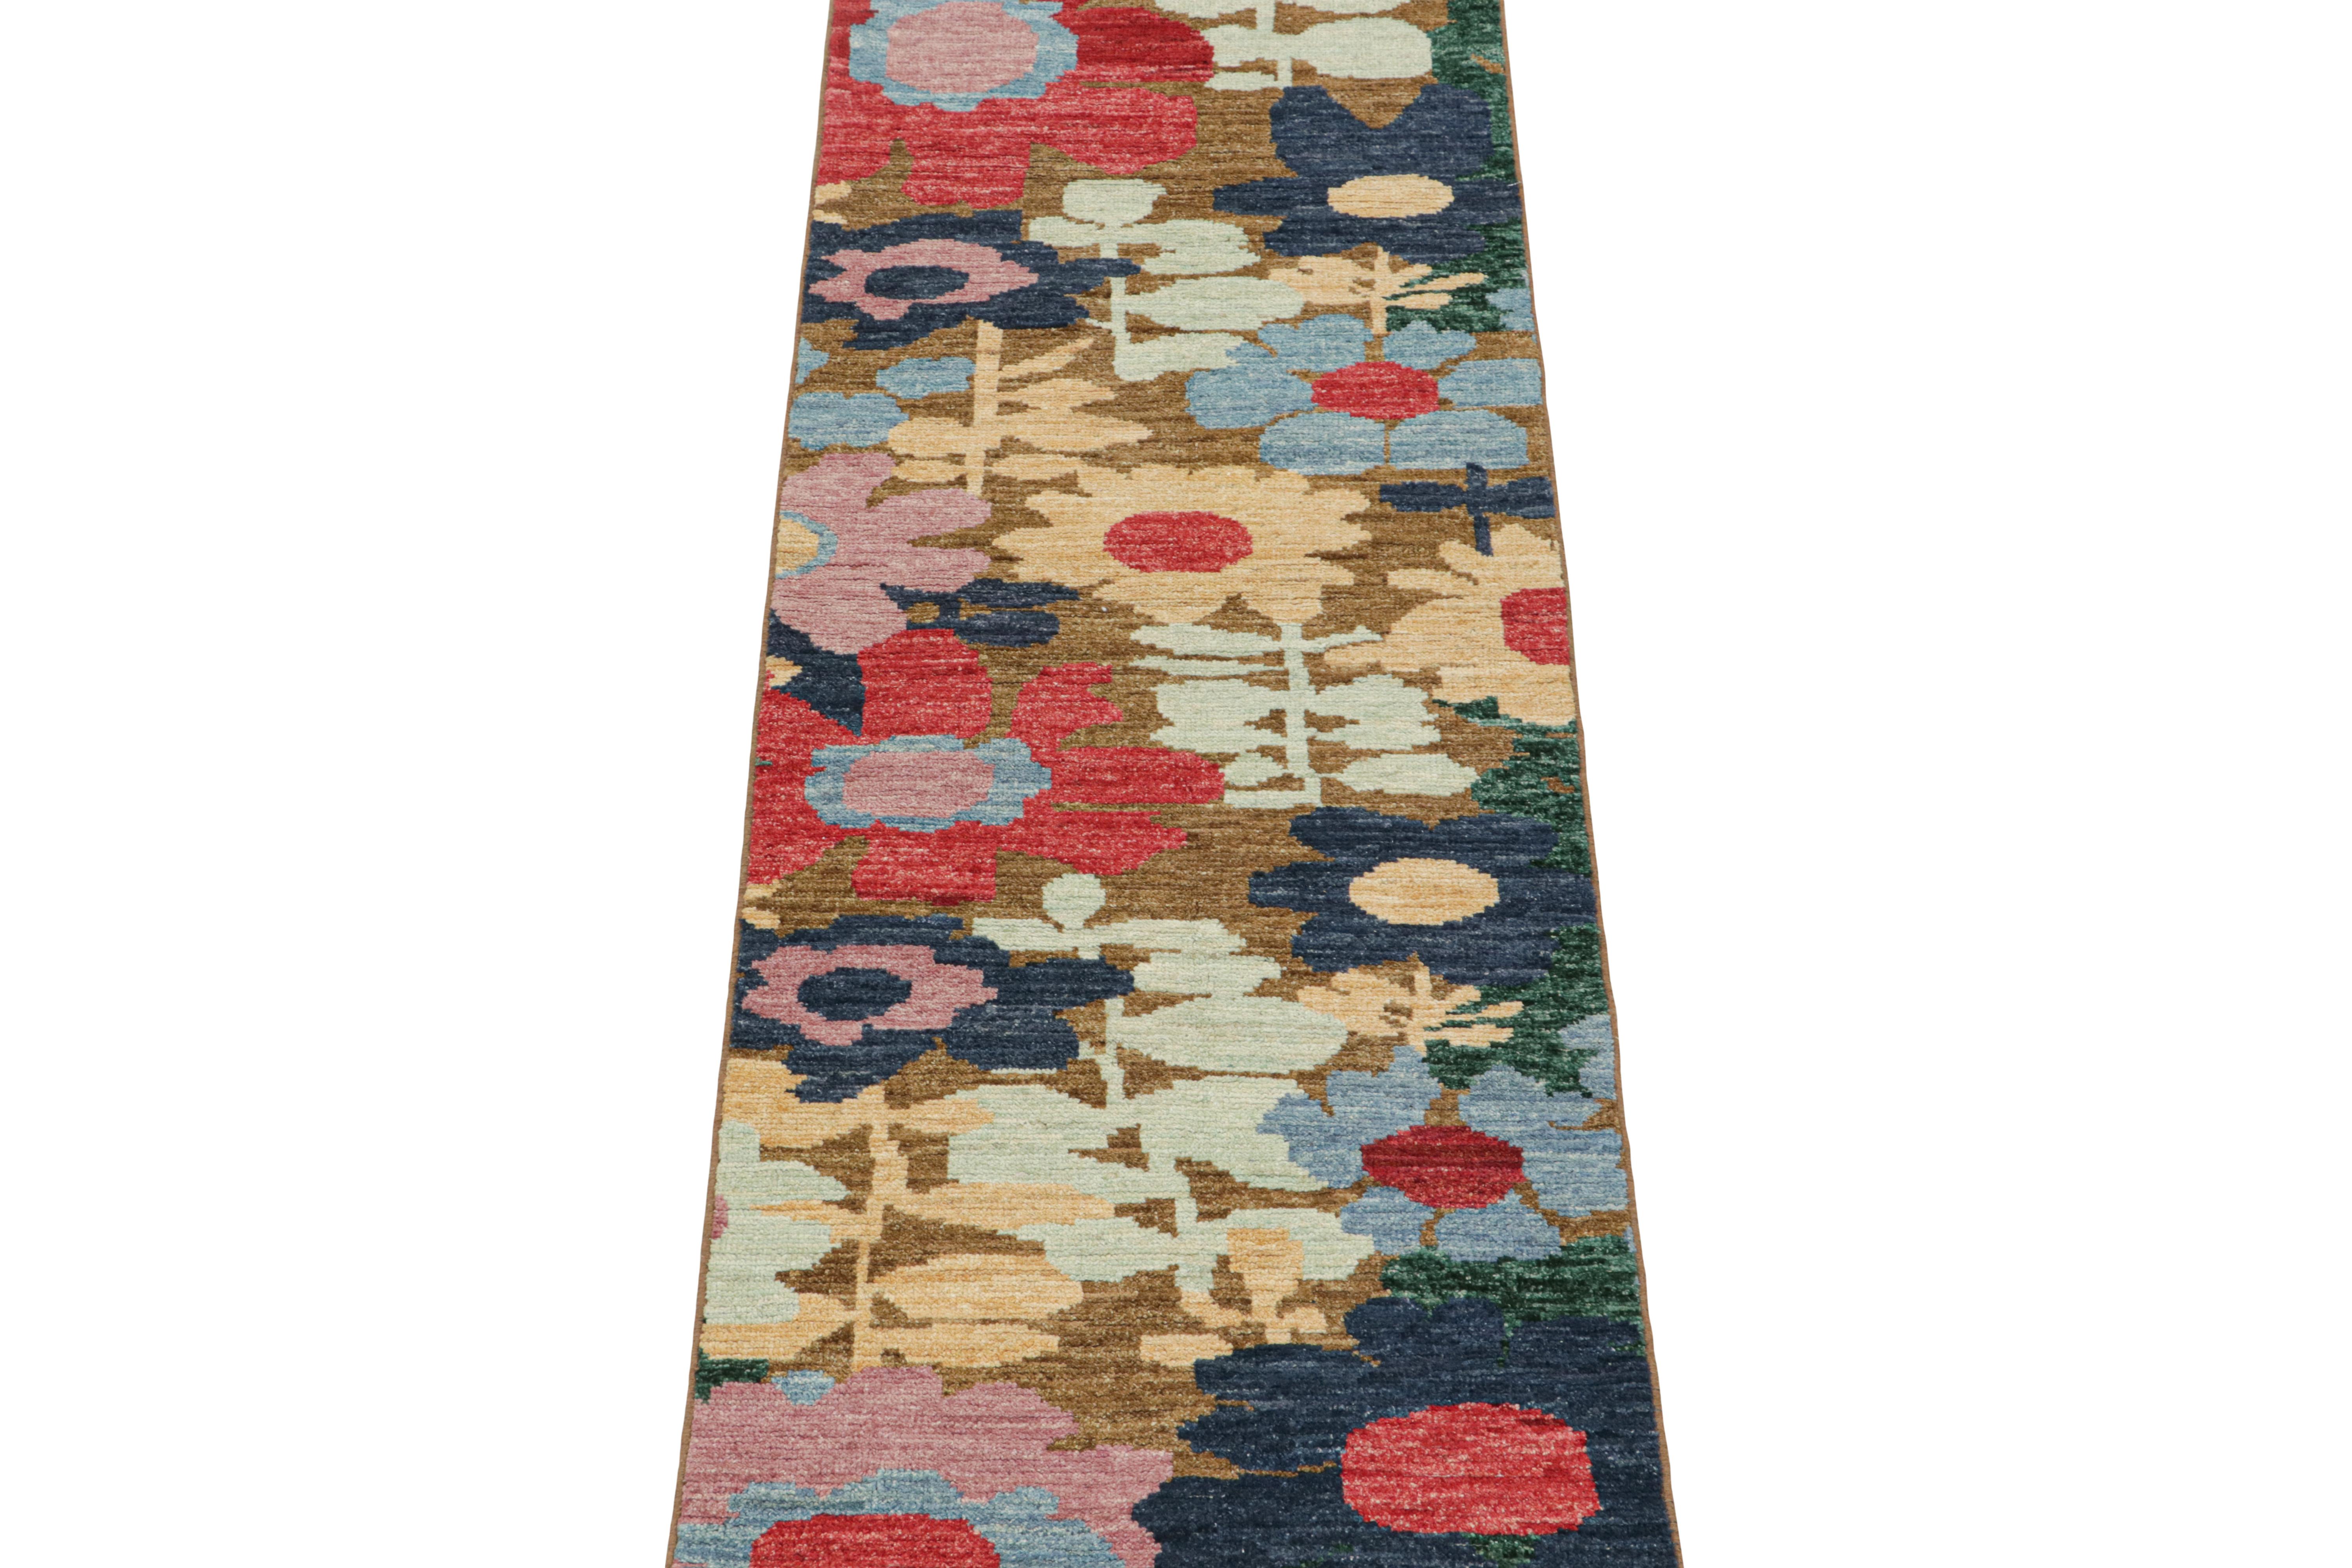 This contemporary 3x8 runner is the latest additions to Rug & Kilim’s New & Modern Collection. Hand-knotted in wool.

Further On the design:

This refreshing piece enjoys polychromatic floral patterns in a playful, almost impressionist look. Keen